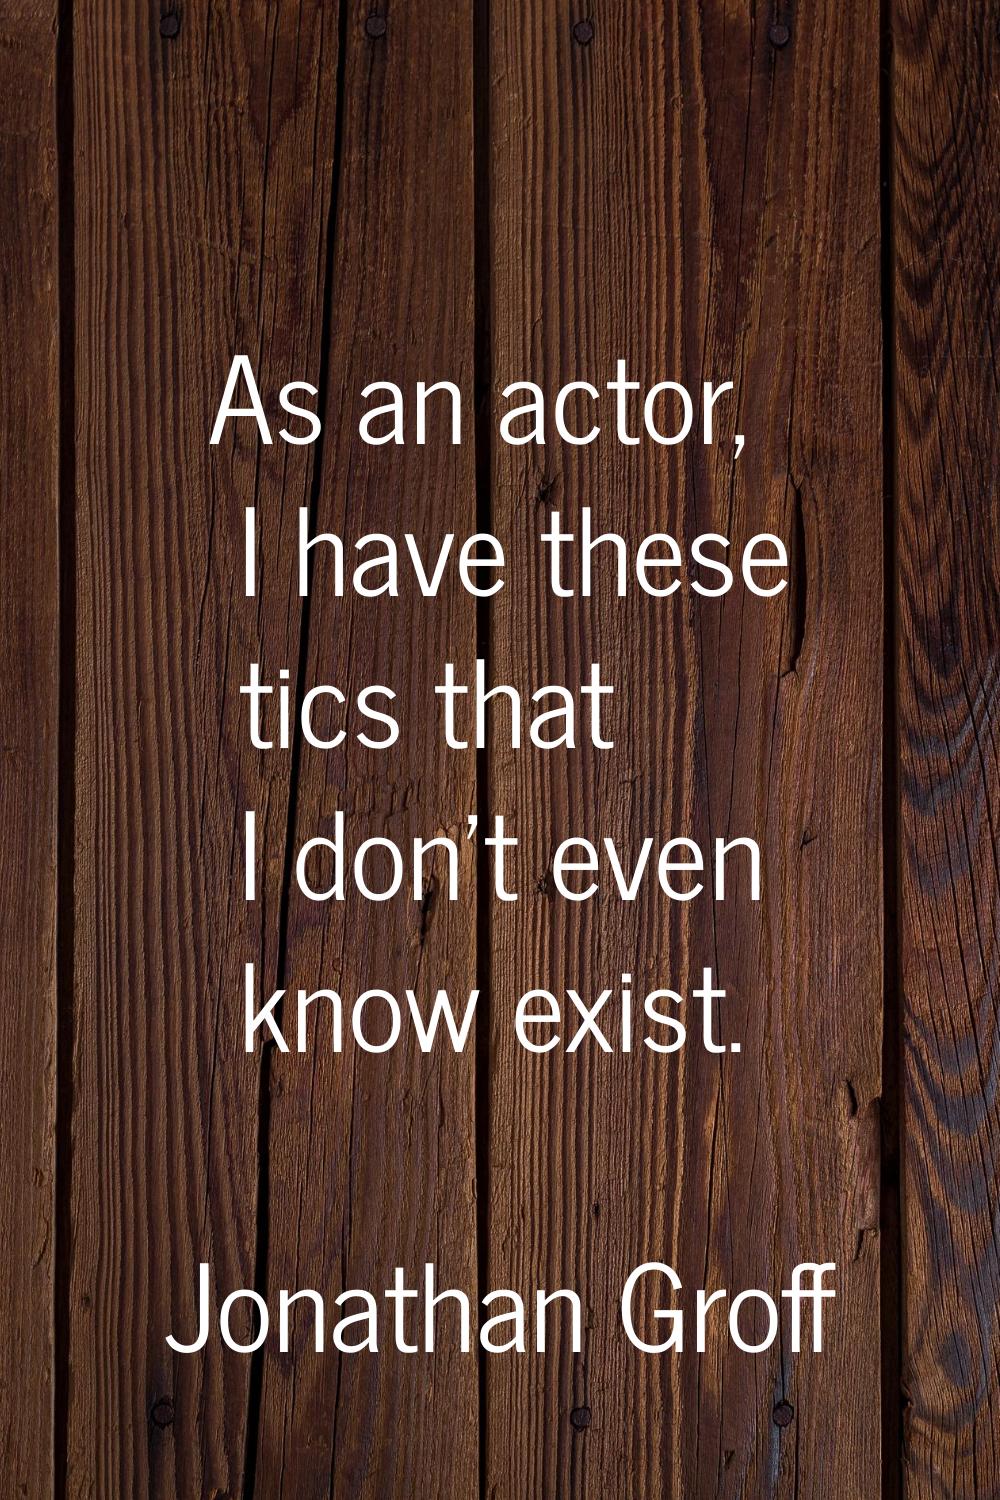 As an actor, I have these tics that I don't even know exist.